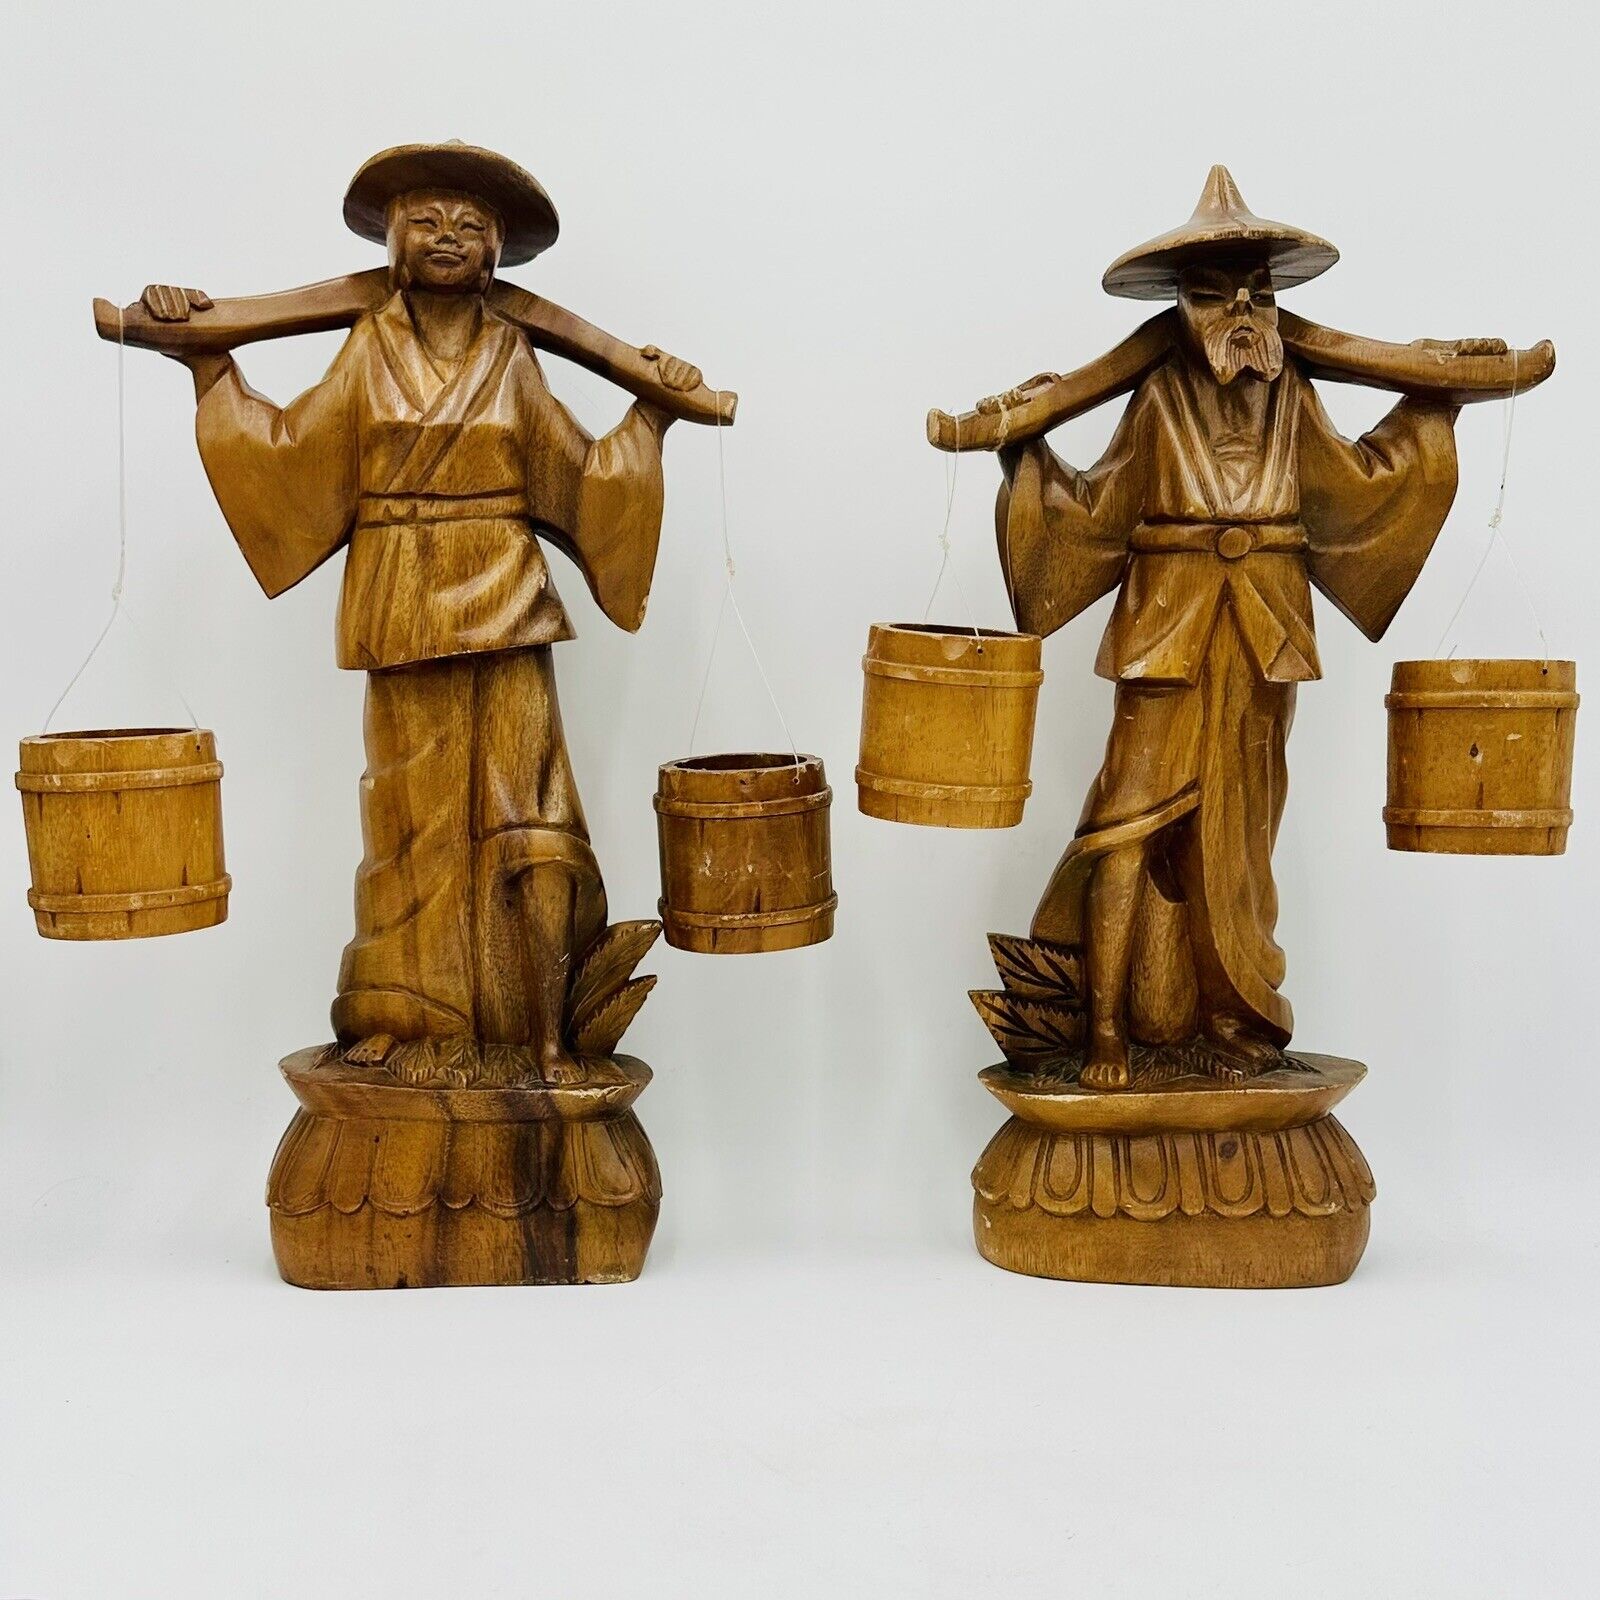 RARE PAIR OF TEAK WOOD ASIAN WATER CARRIERS, 21 TALL, HANDCARVED FROM THAILAND